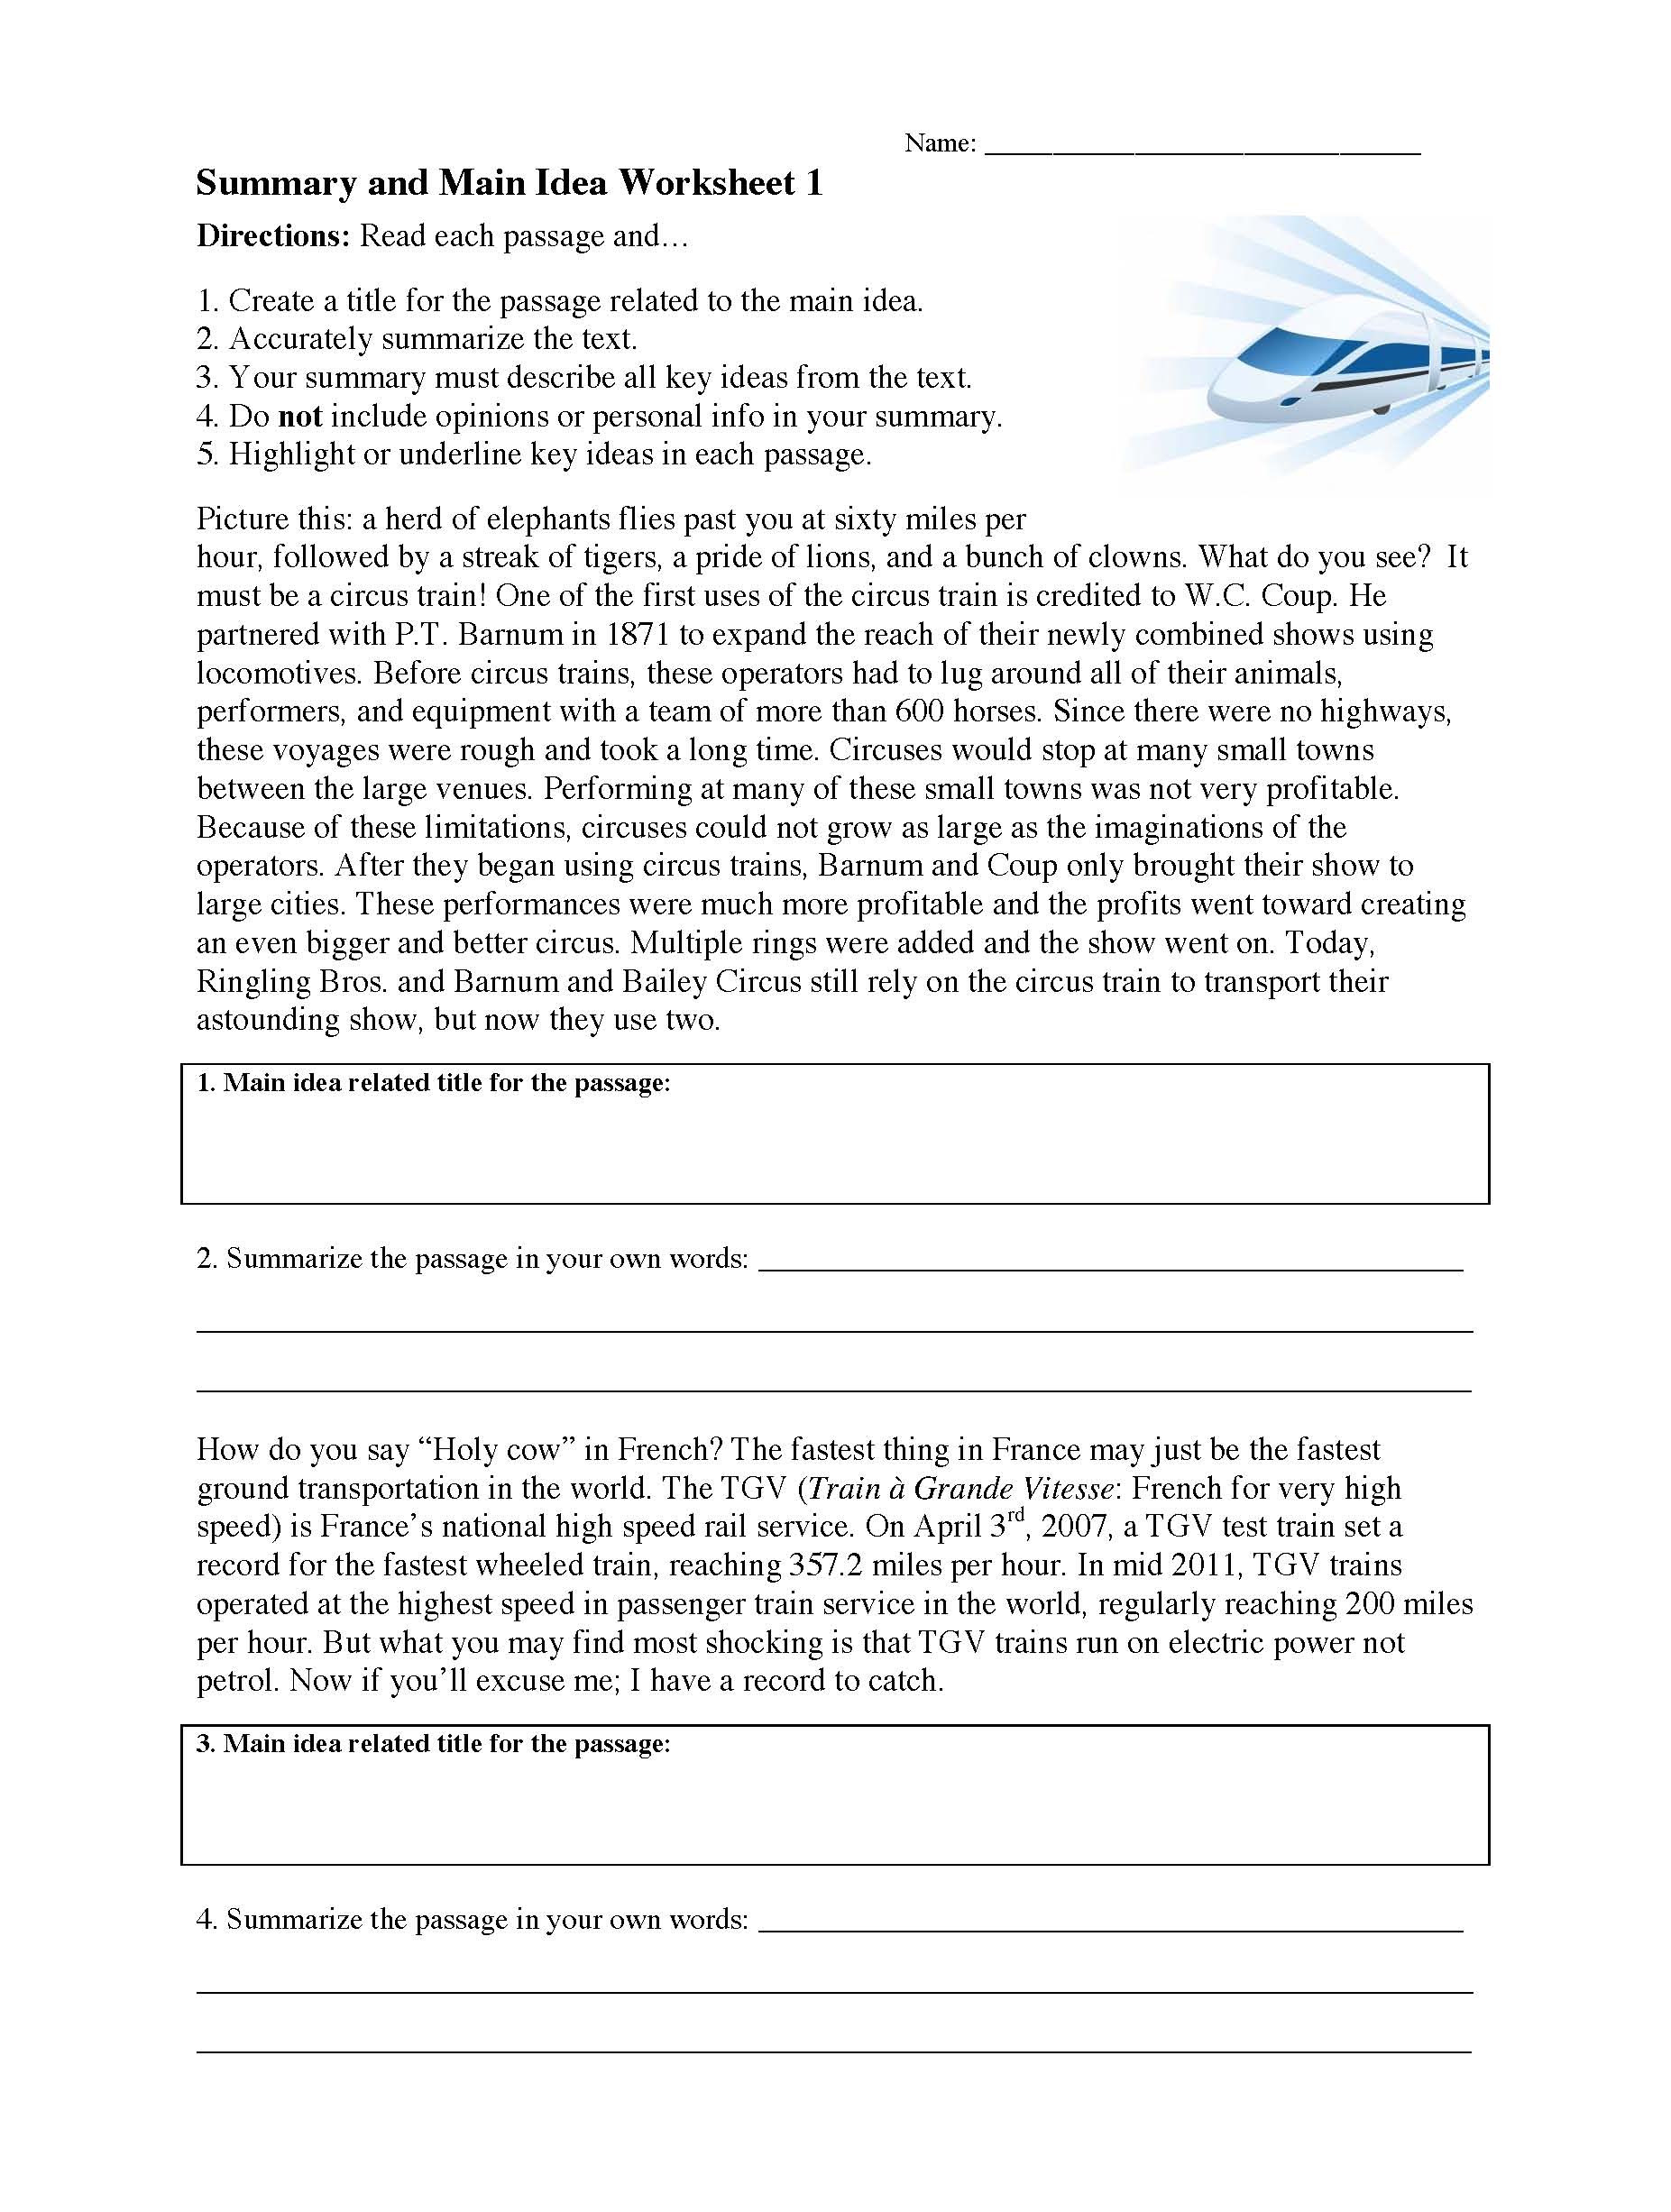 Summary And Main Idea Worksheet 1  Preview